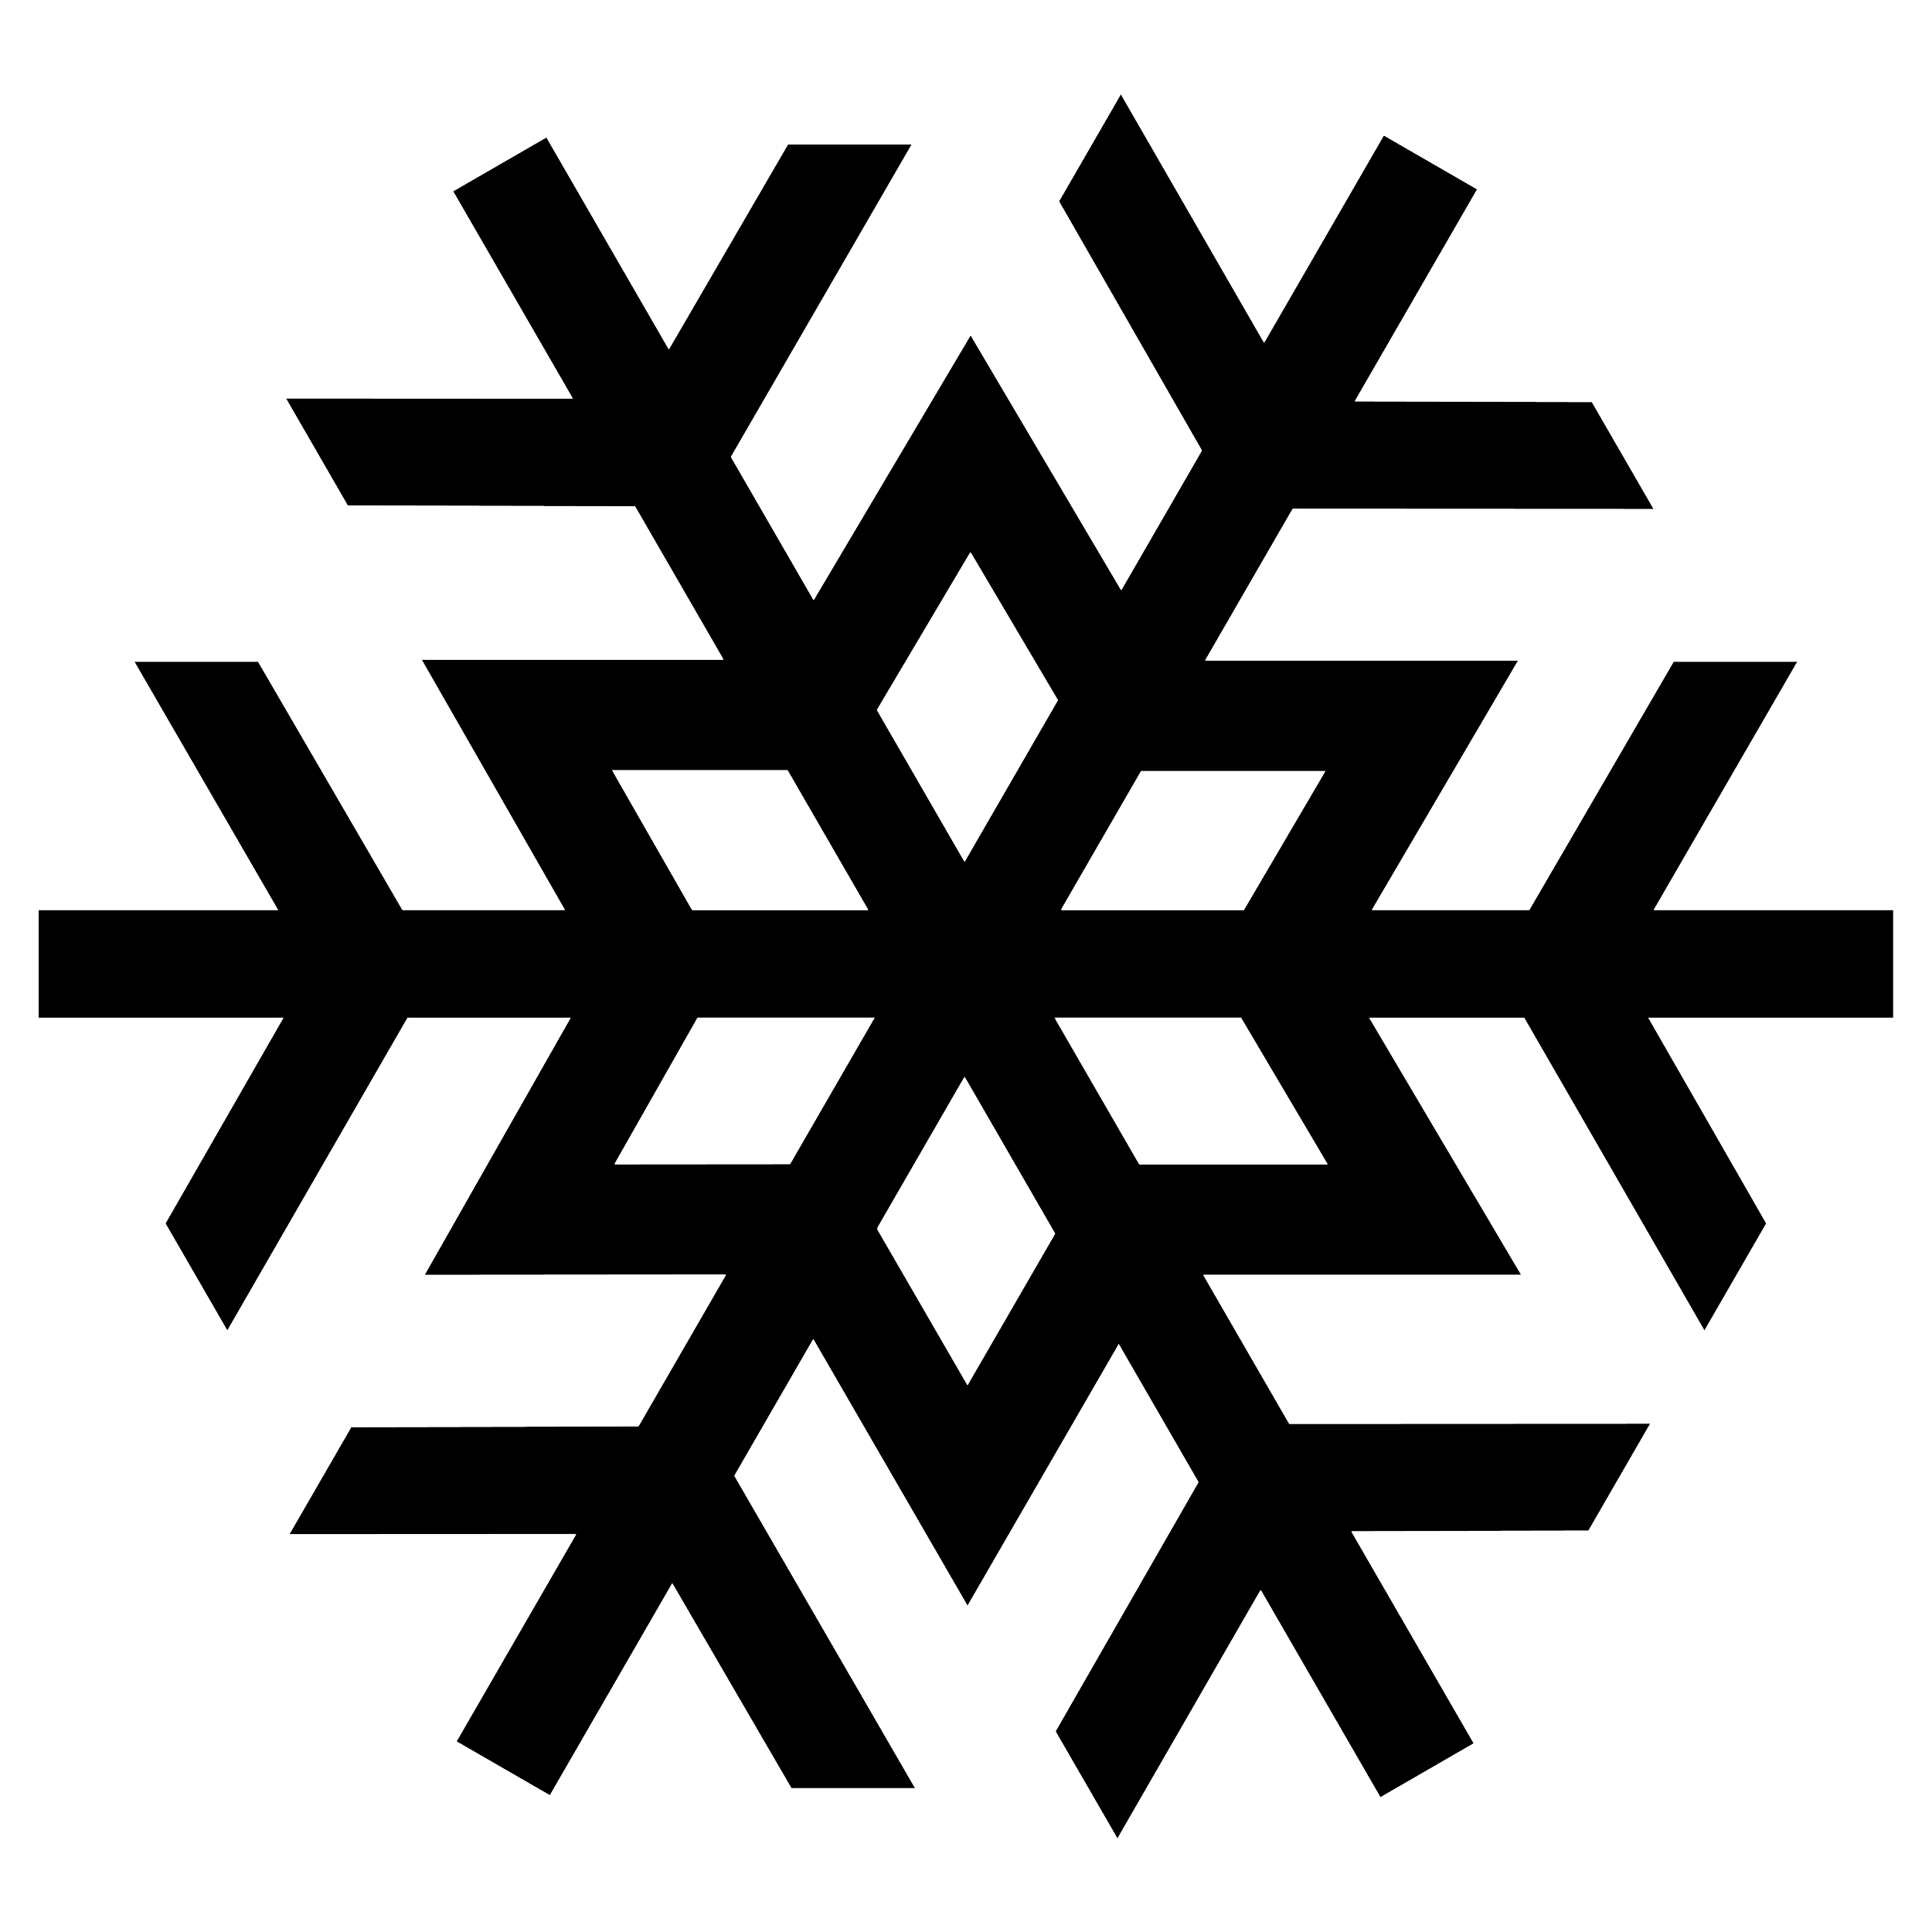 Snowflake Silhouette Png Image - Snowflake, Transparent background PNG HD thumbnail